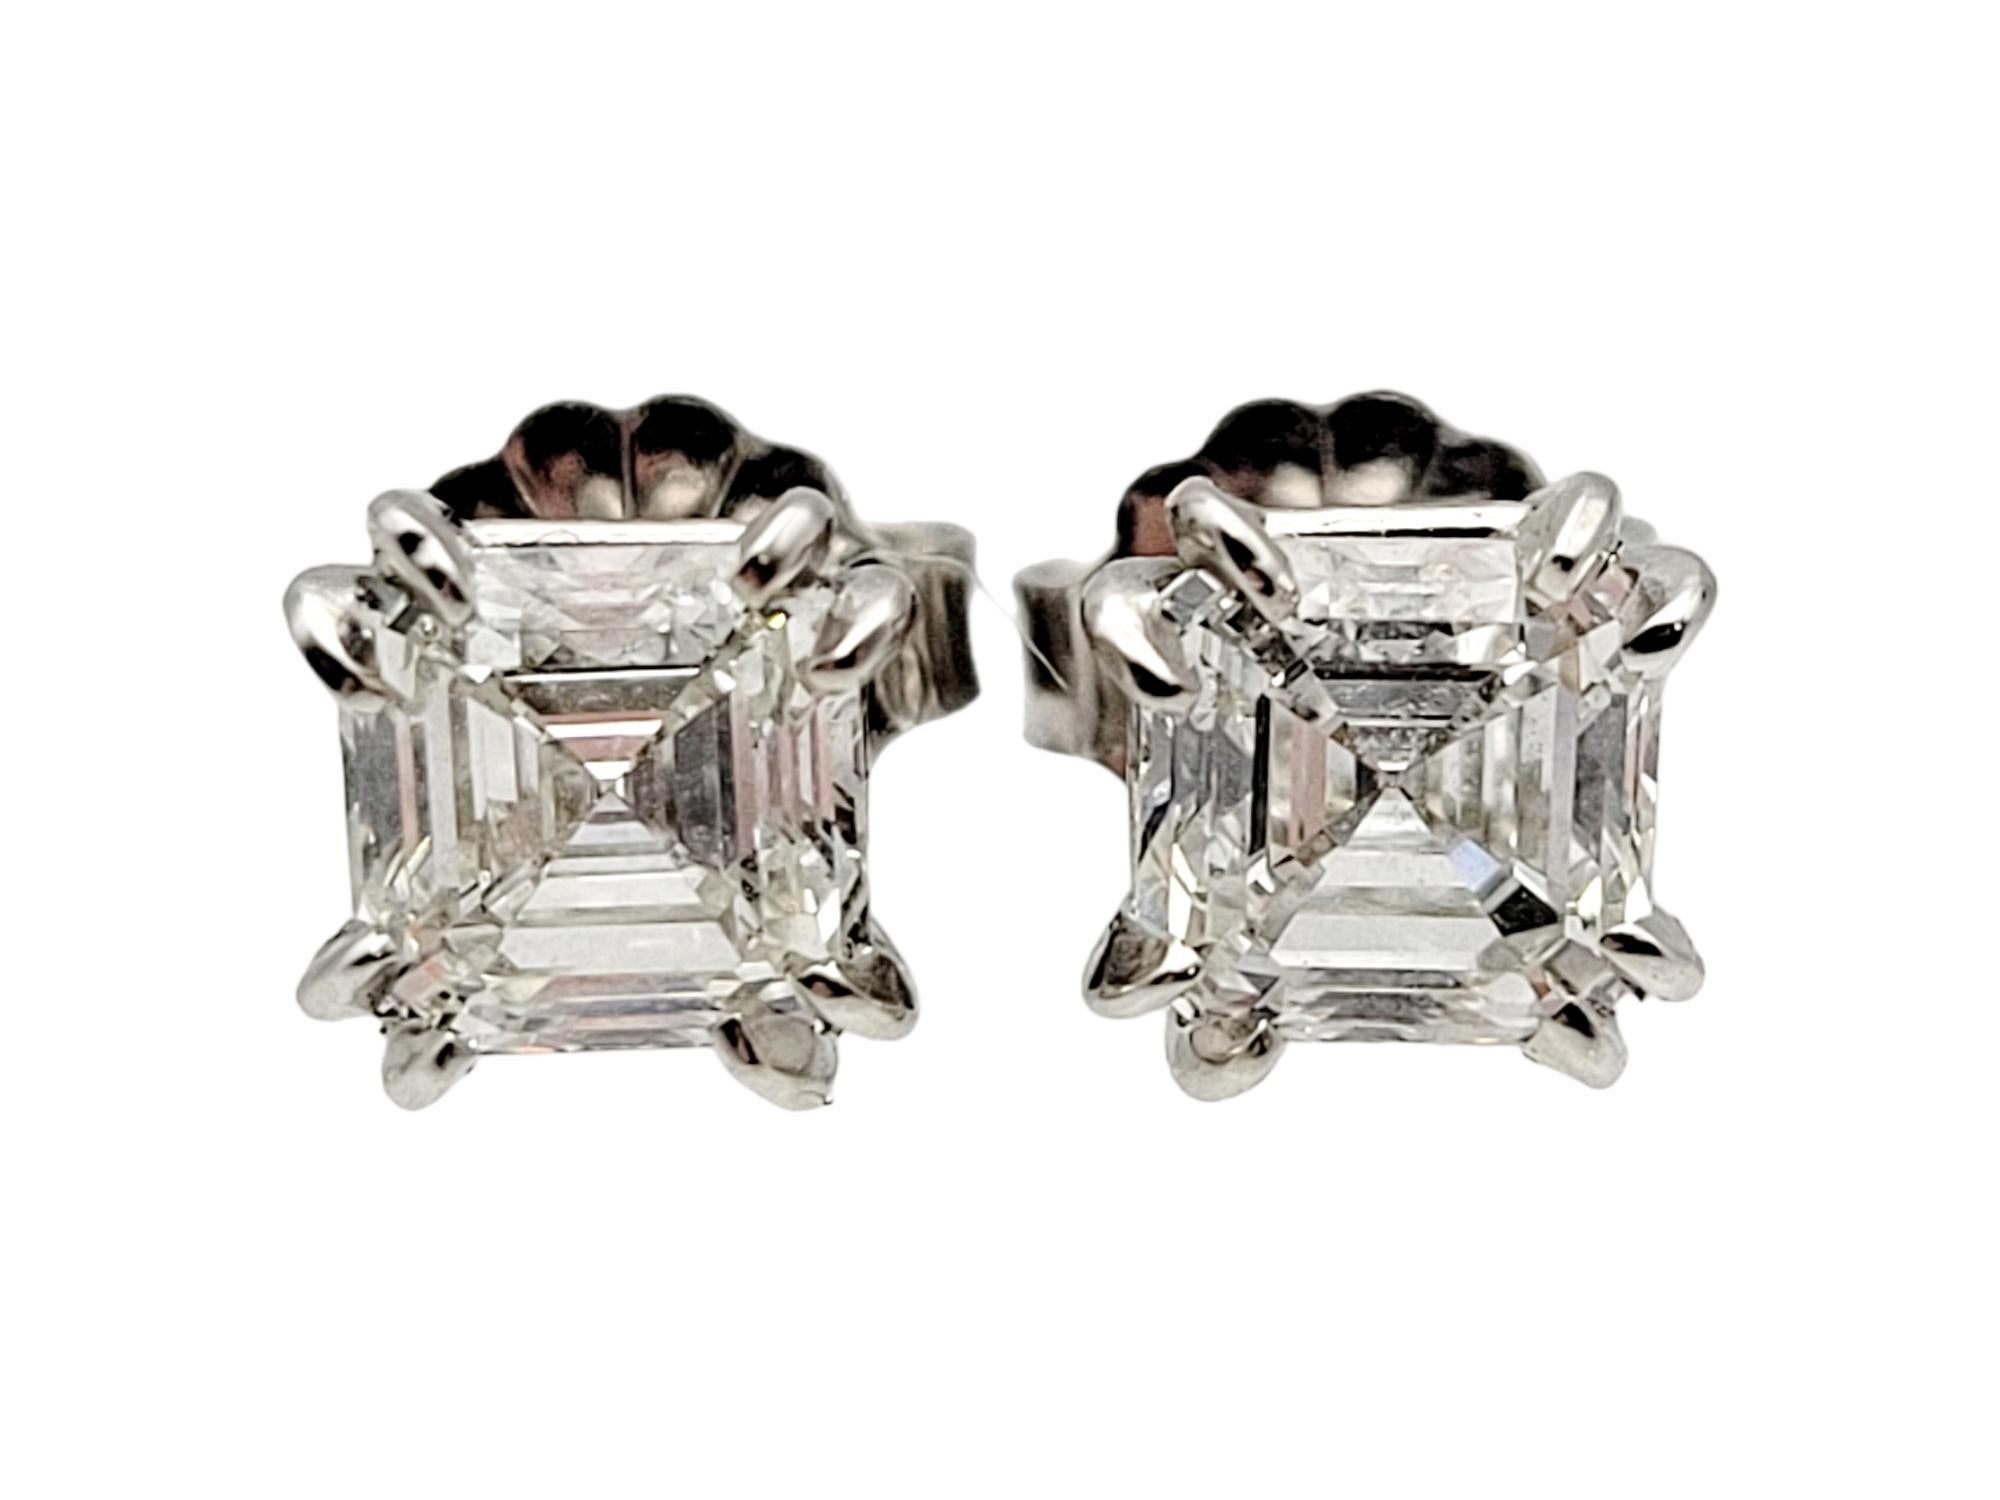 Contemporary 1.41 Carats Total Emerald Cut Solitaire Diamond Stud Earrings White Gold GIA For Sale